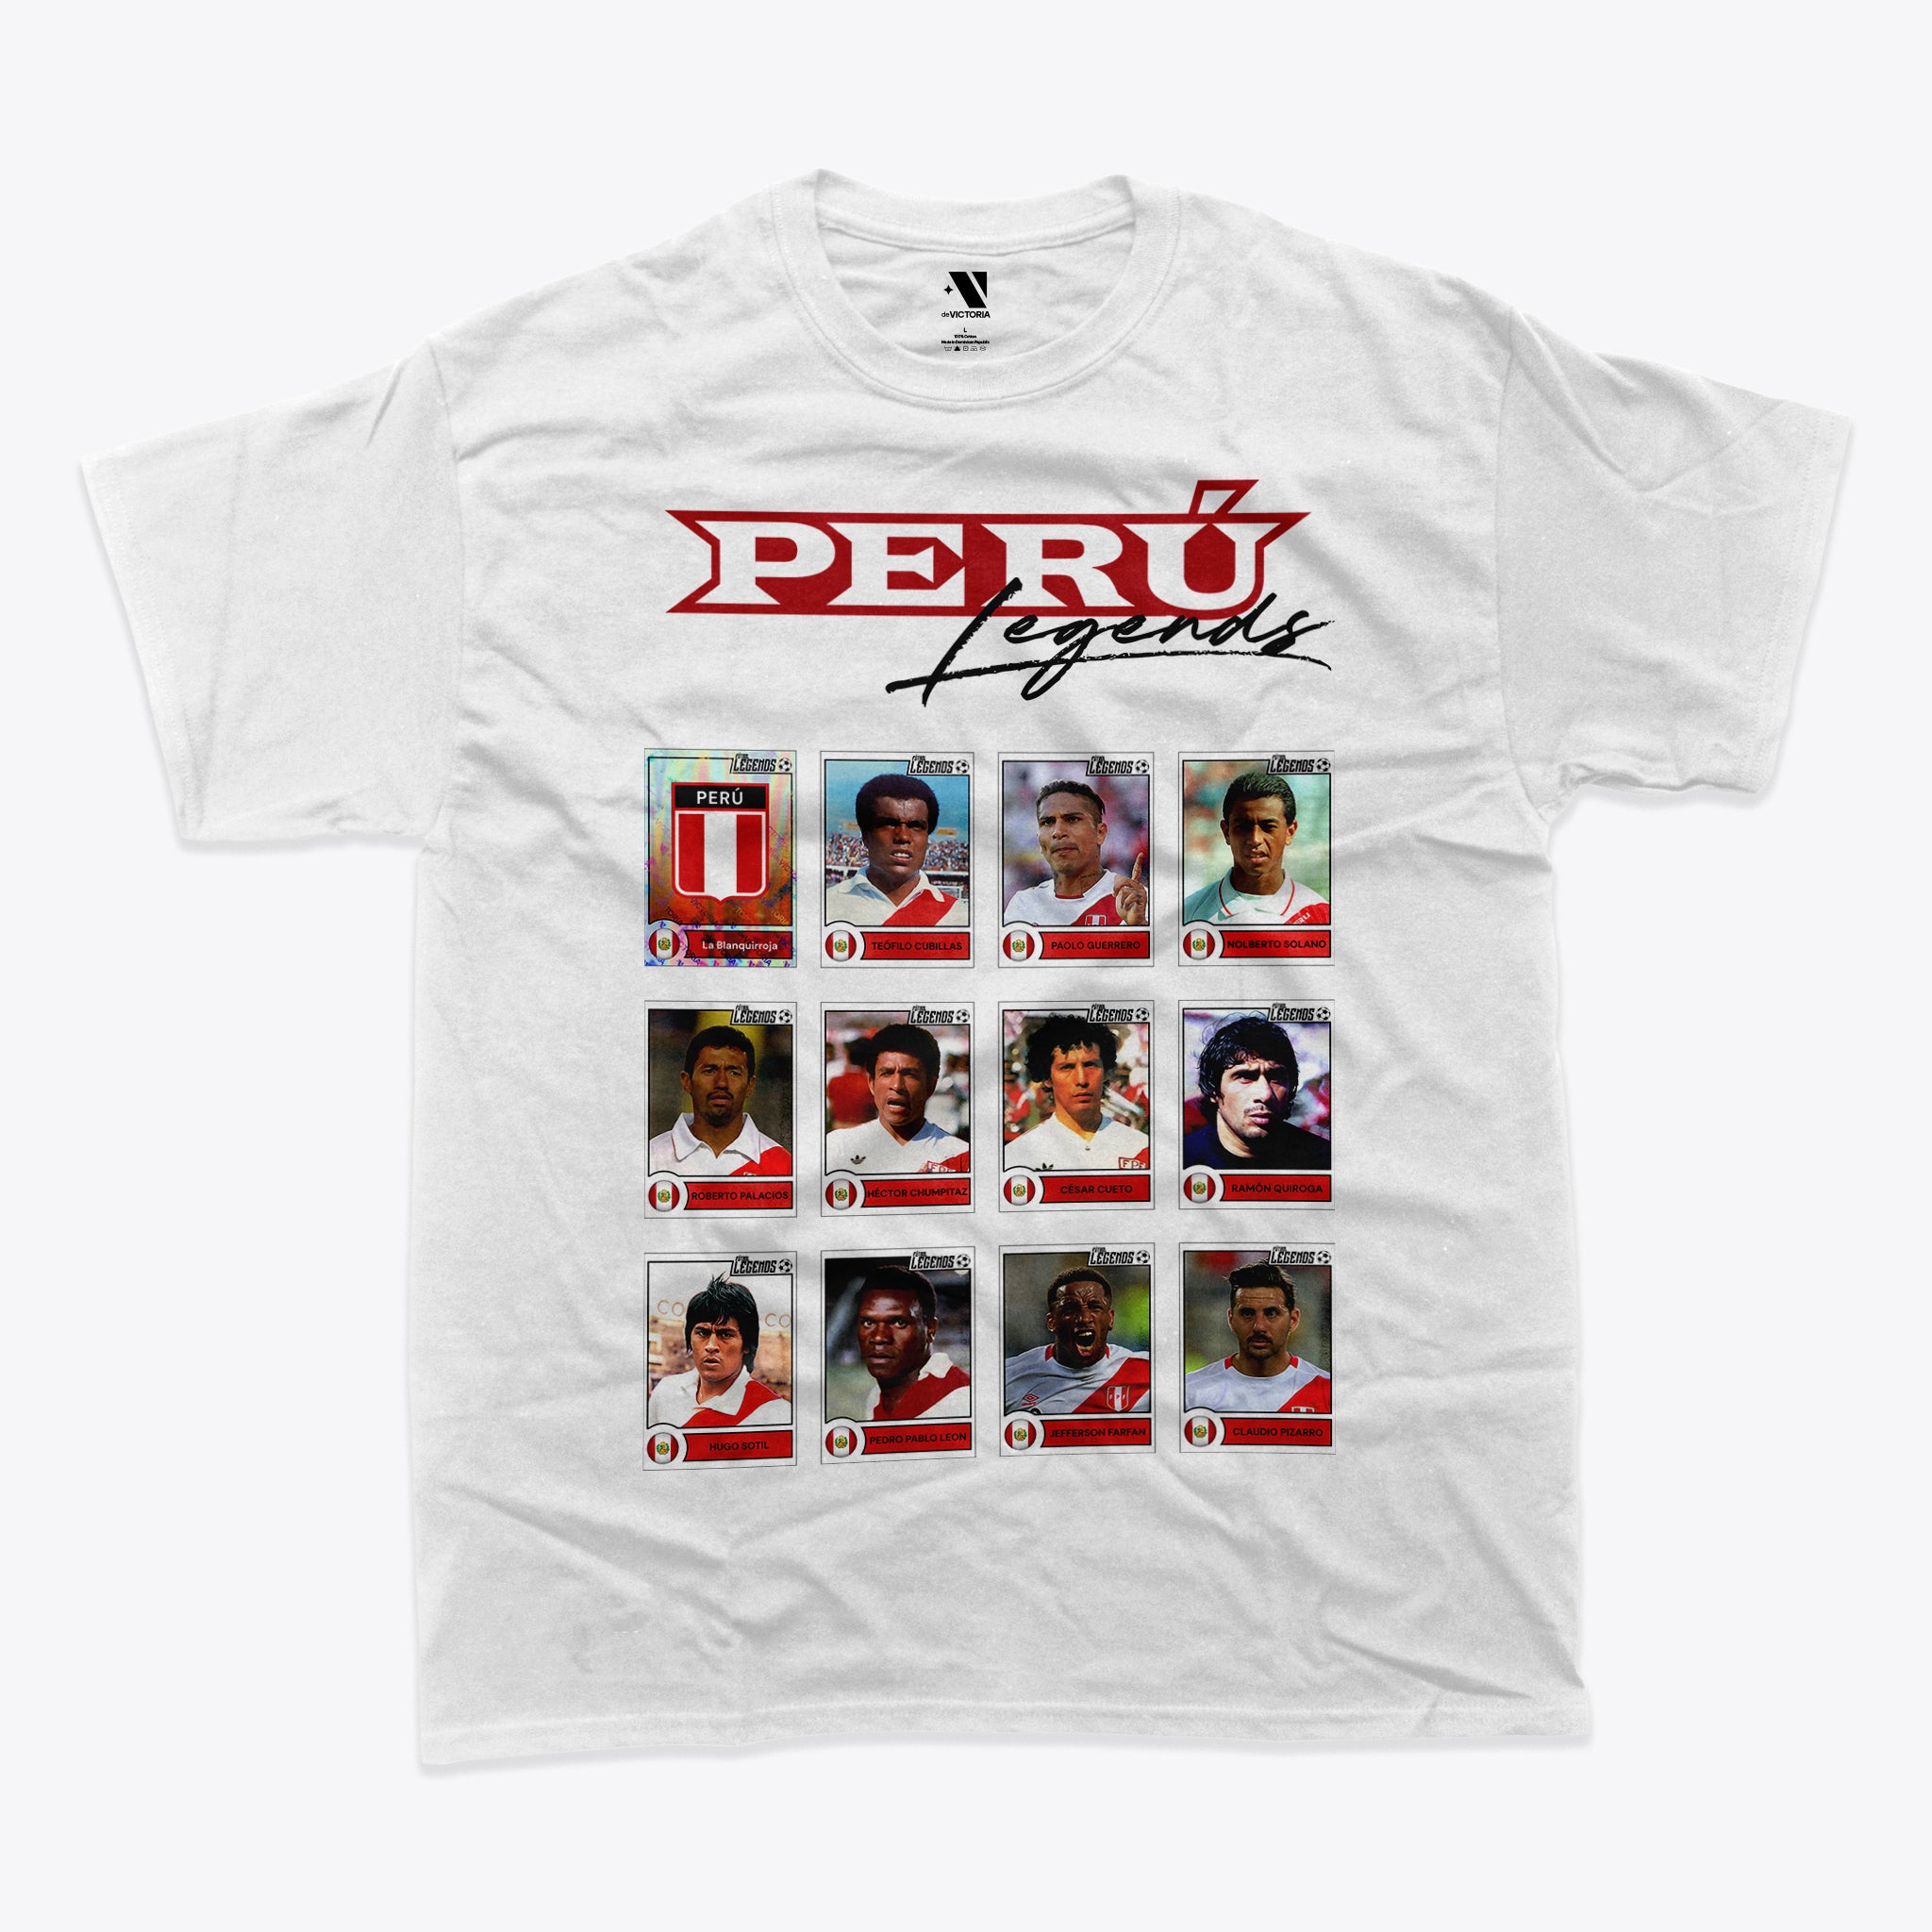 Peru Legends (Trading Cards) - Graphic Tee